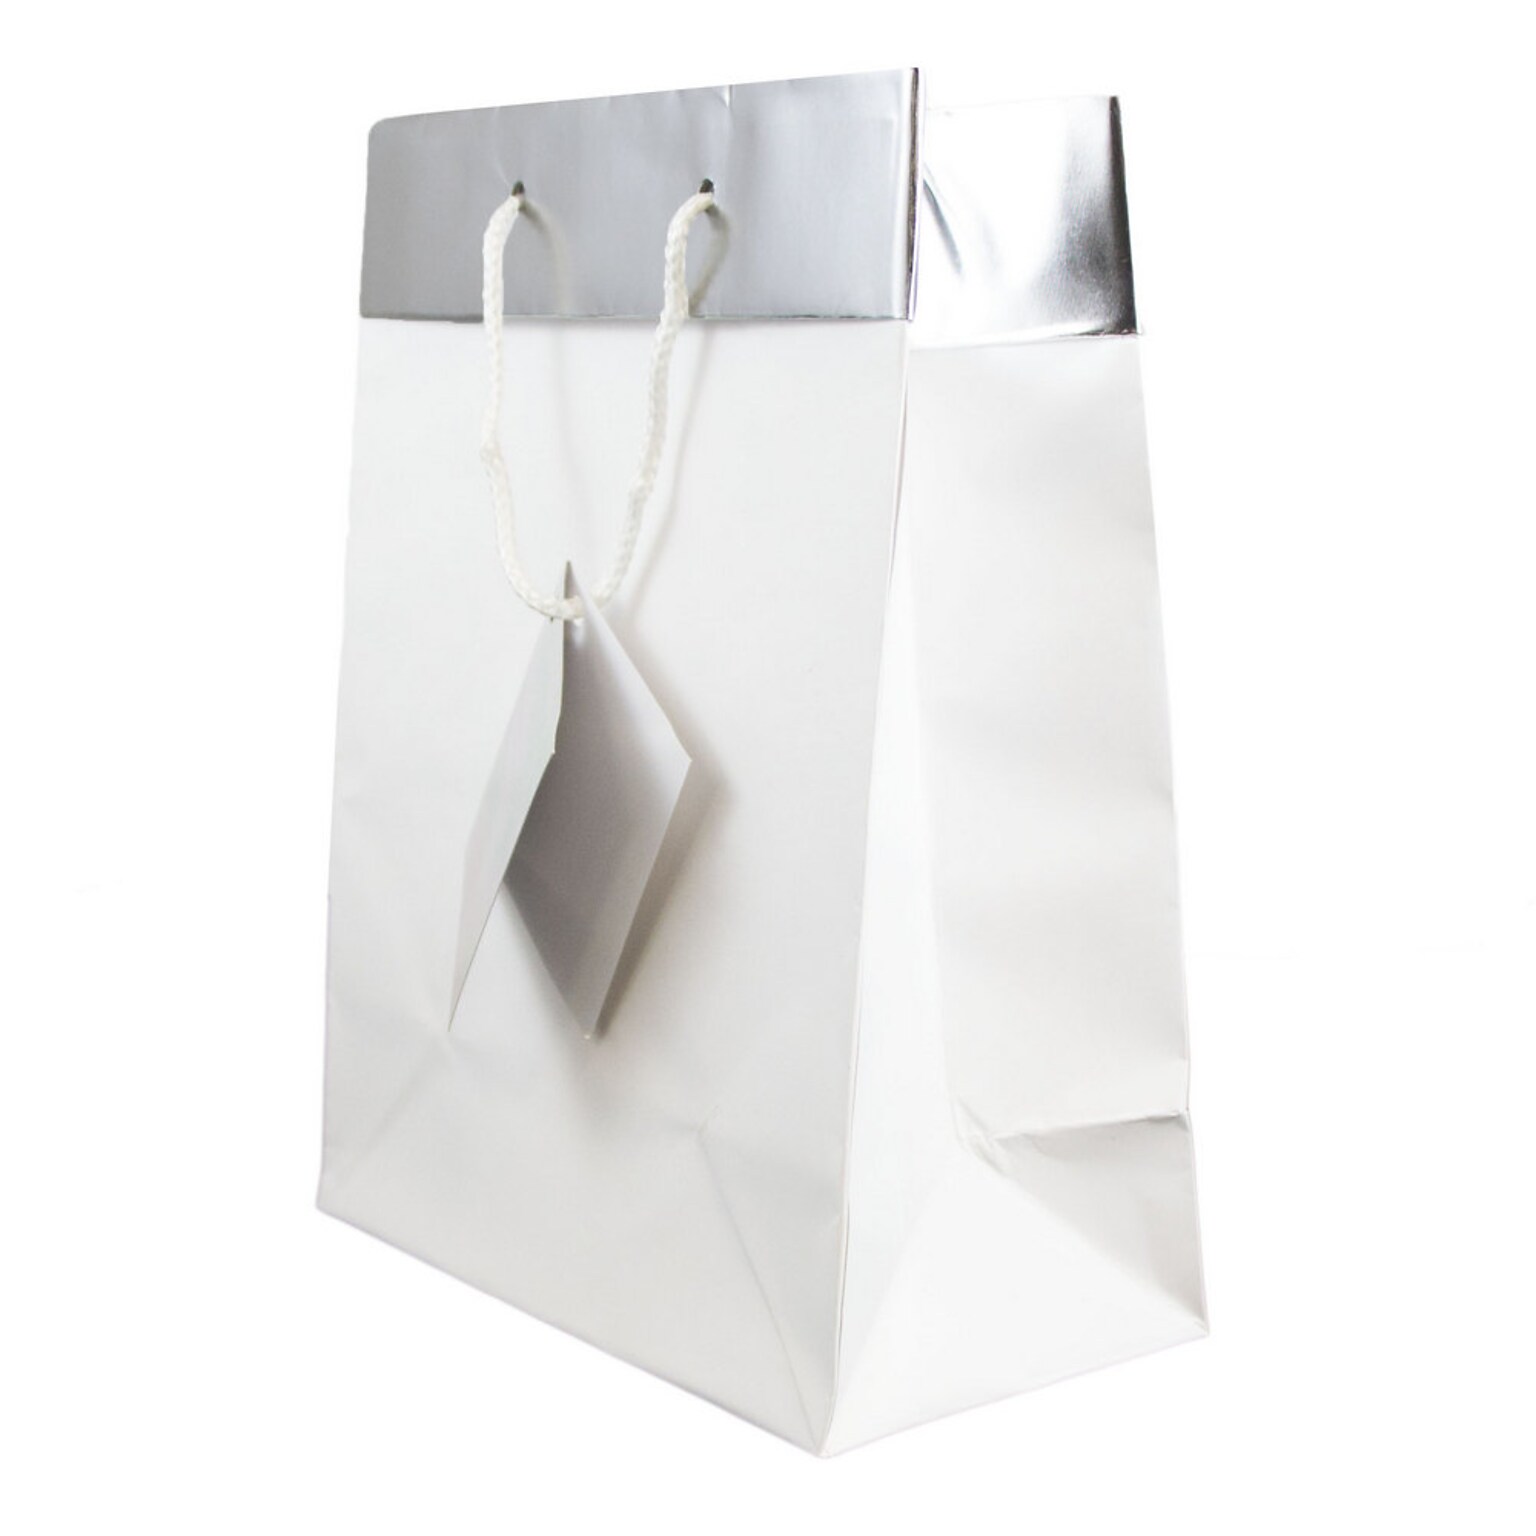 JAM PAPER Gift Bags with Rope Handles, Medium, 8 x 10 x 4- White Matte with Silver Top, 24/box (4431768B)